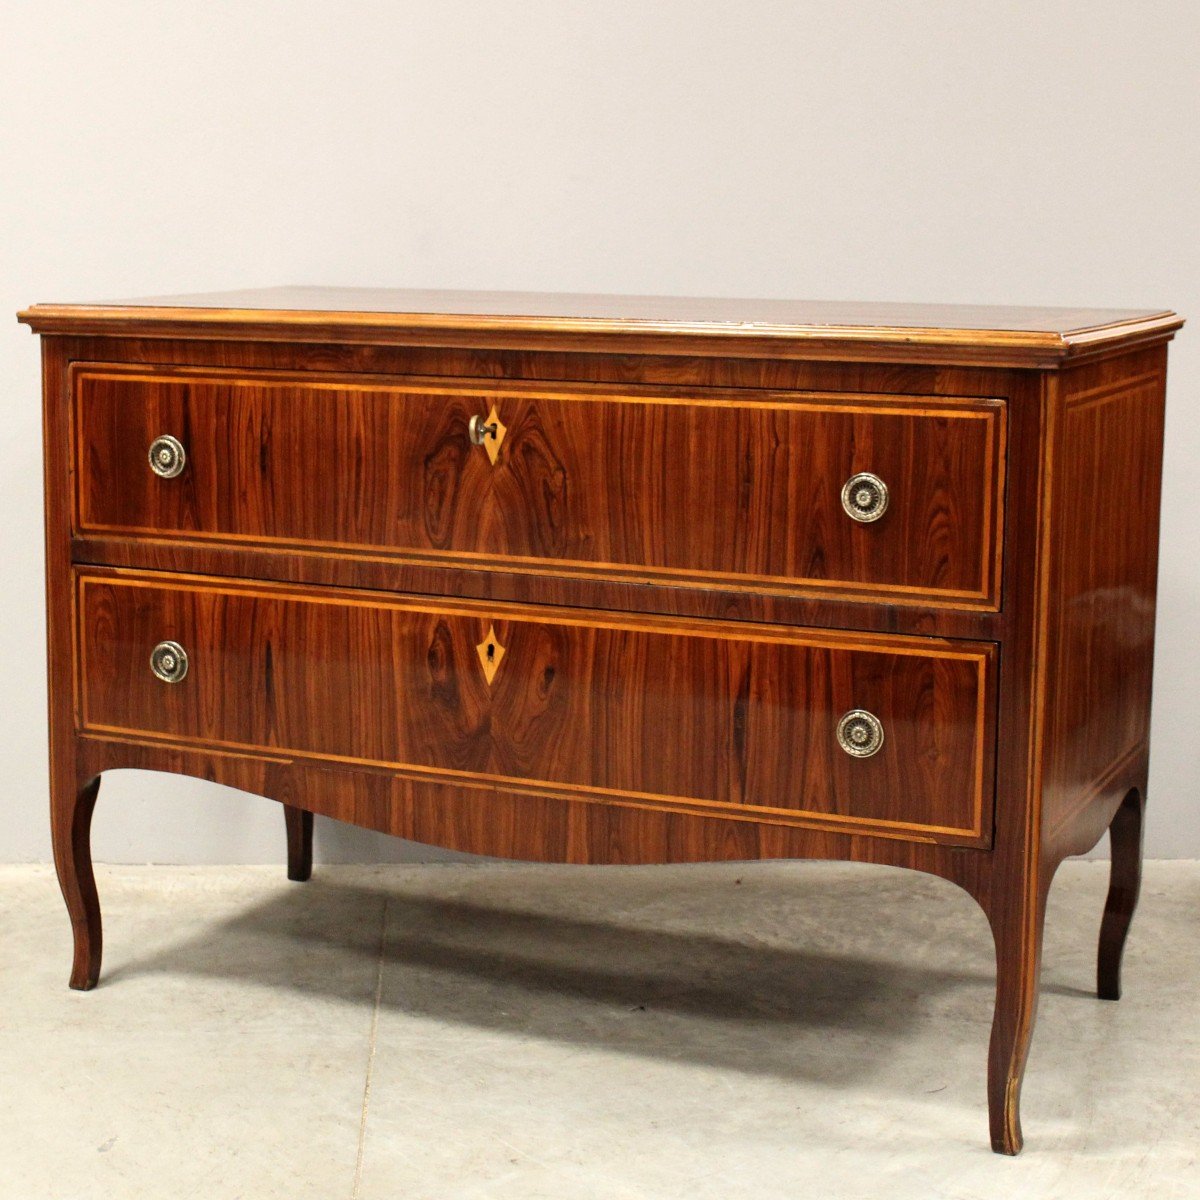 Antique Louis XV Chest Of Drawers In Rosewood And Marquetry - Italy 18th